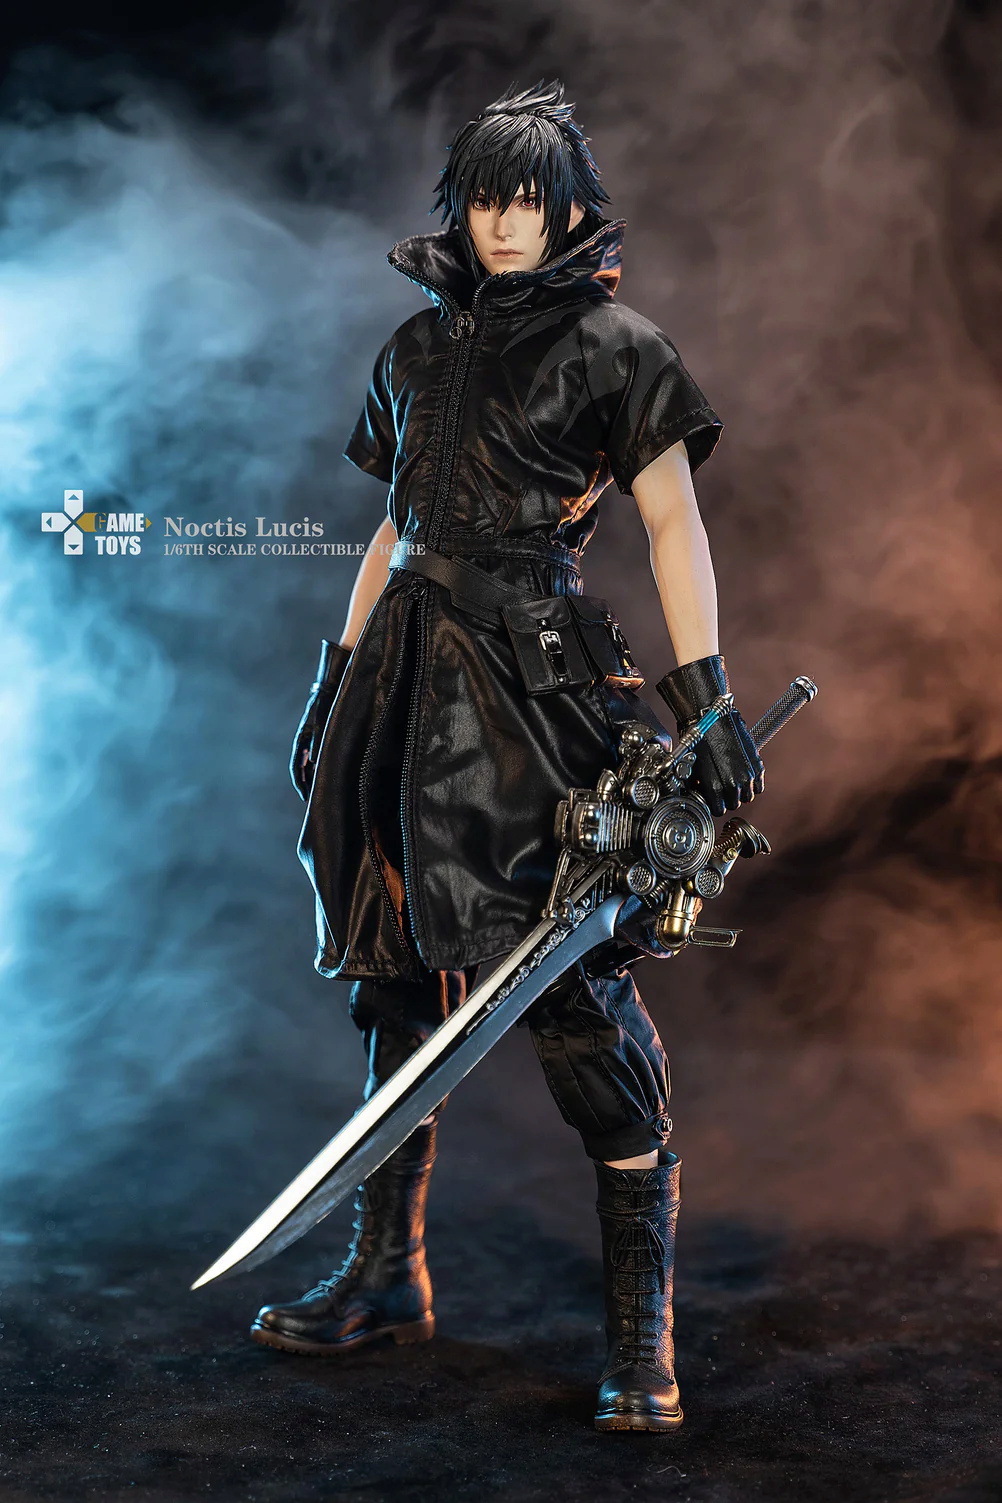 NEW PRODUCT: Gametoys Noctis Lucis, additional accessories, and throne 09_web10